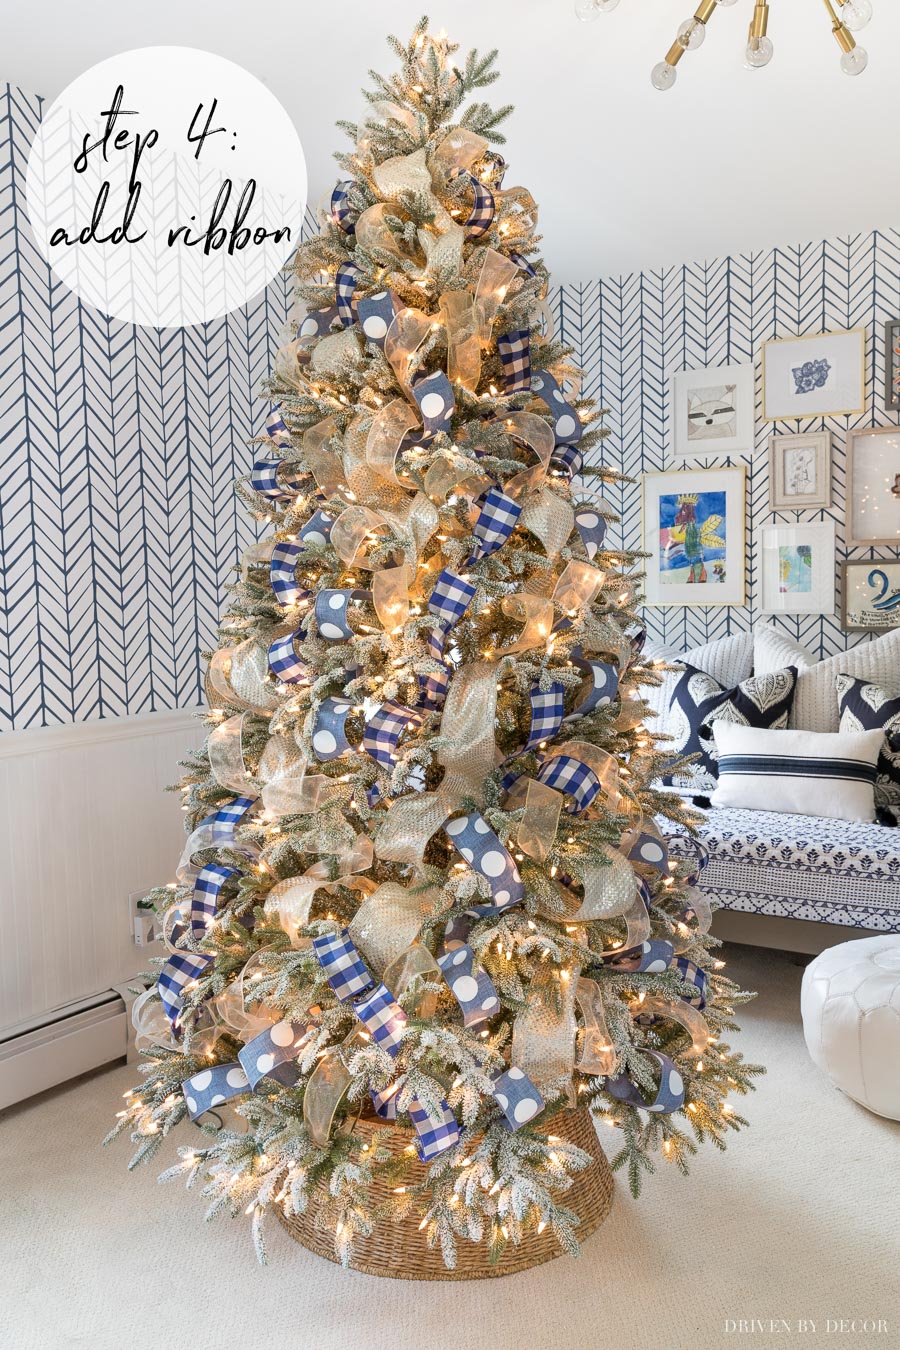 How To Add Ribbon Loops To A Christmas Tree - Full Decorating Tutorial